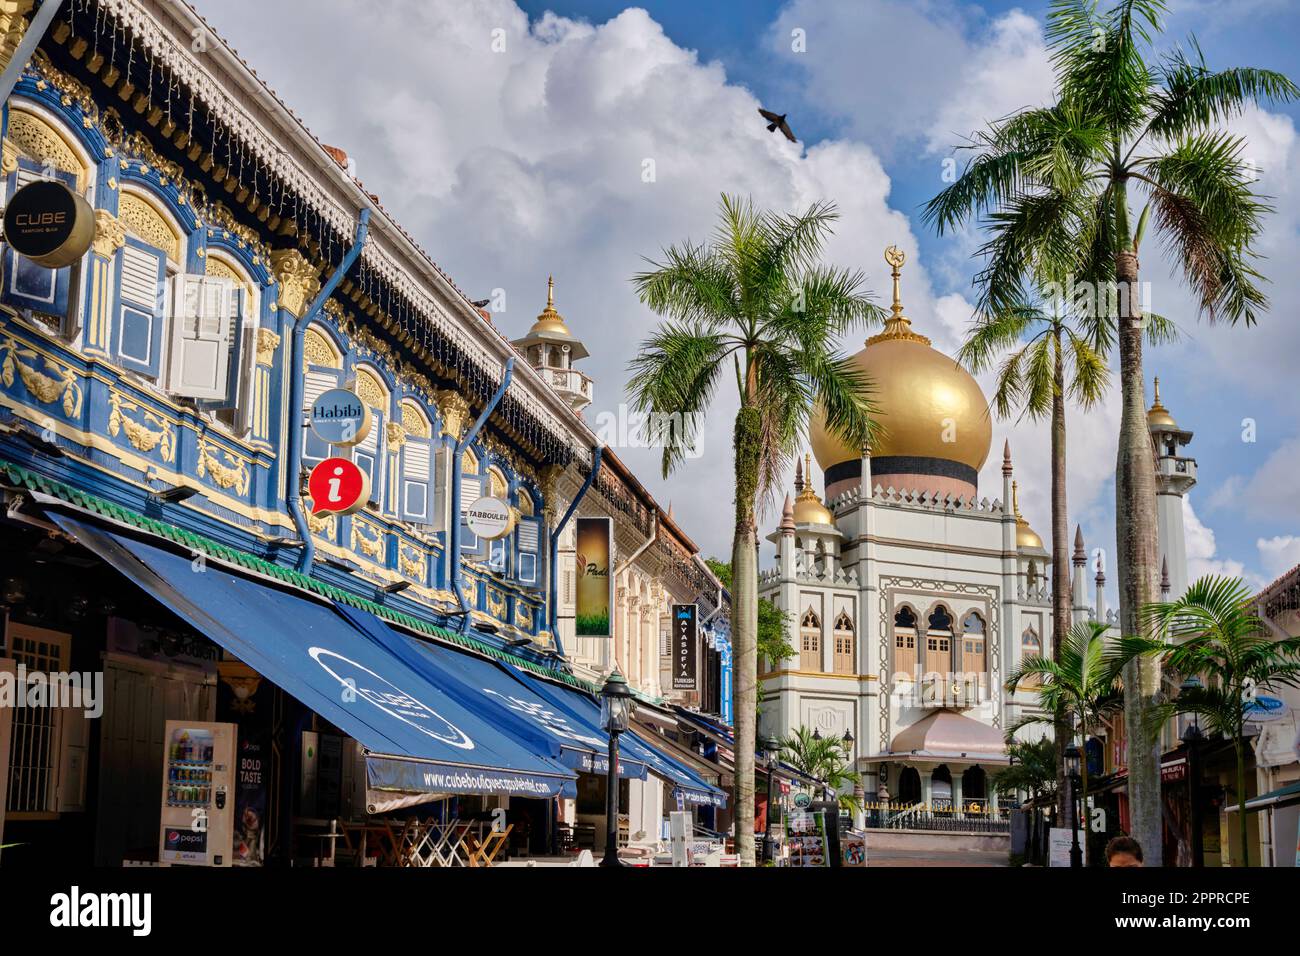 Sultan Mosque in Kampong Glam / Arab Street area in Singapore, with budget accommodation Cube Boutique Capsule Hotel on the left Stock Photo